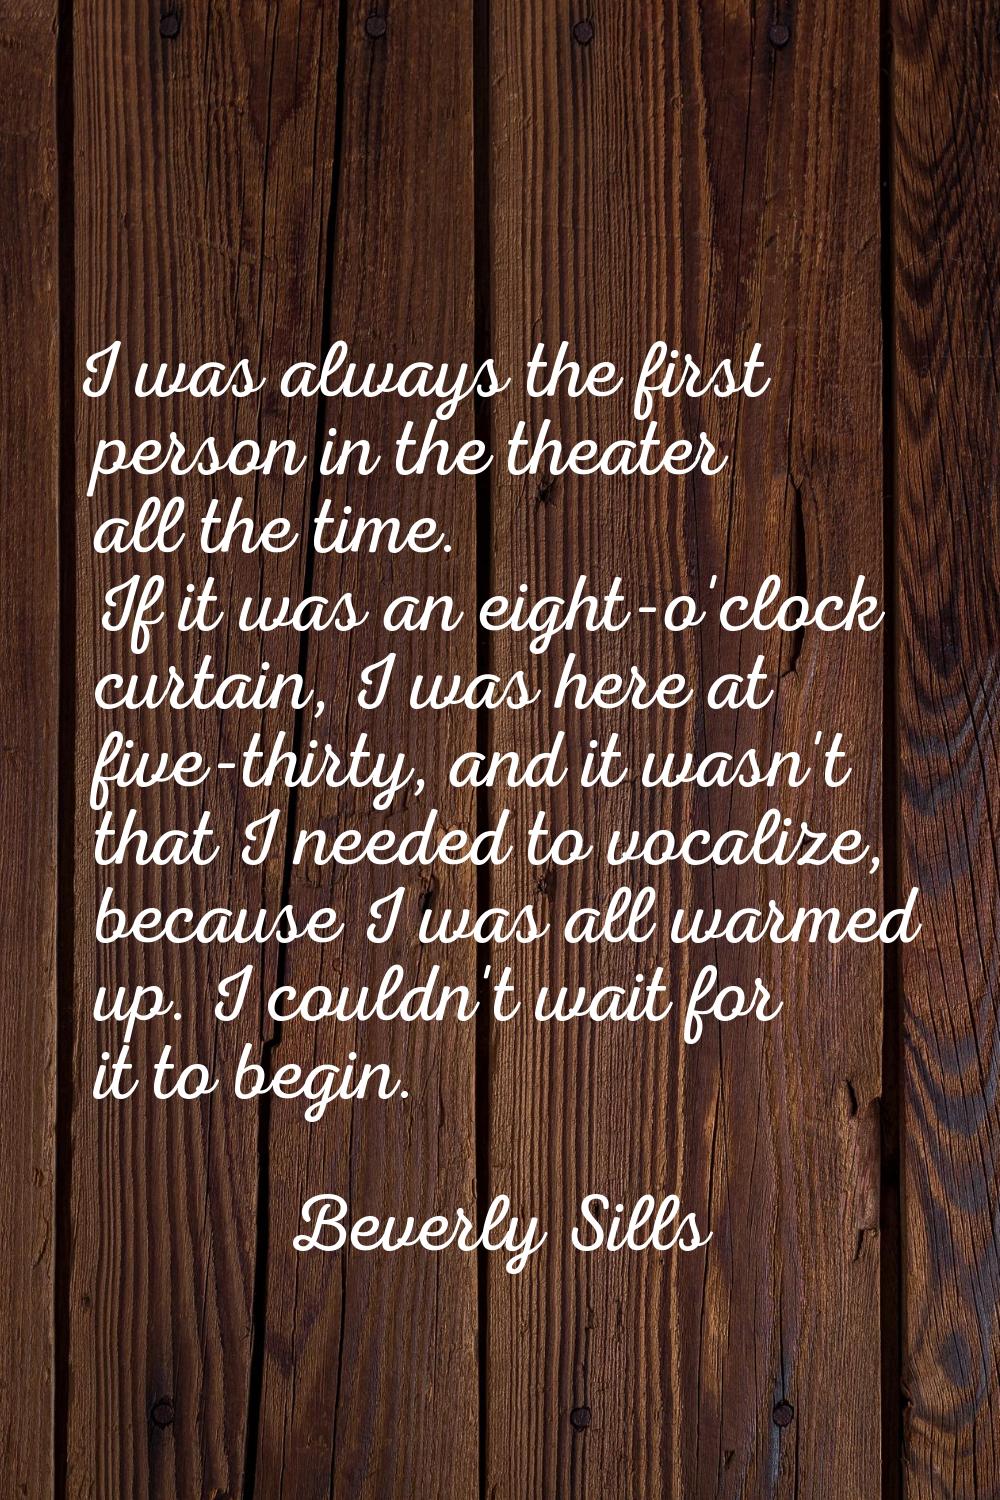 I was always the first person in the theater all the time. If it was an eight-o'clock curtain, I wa